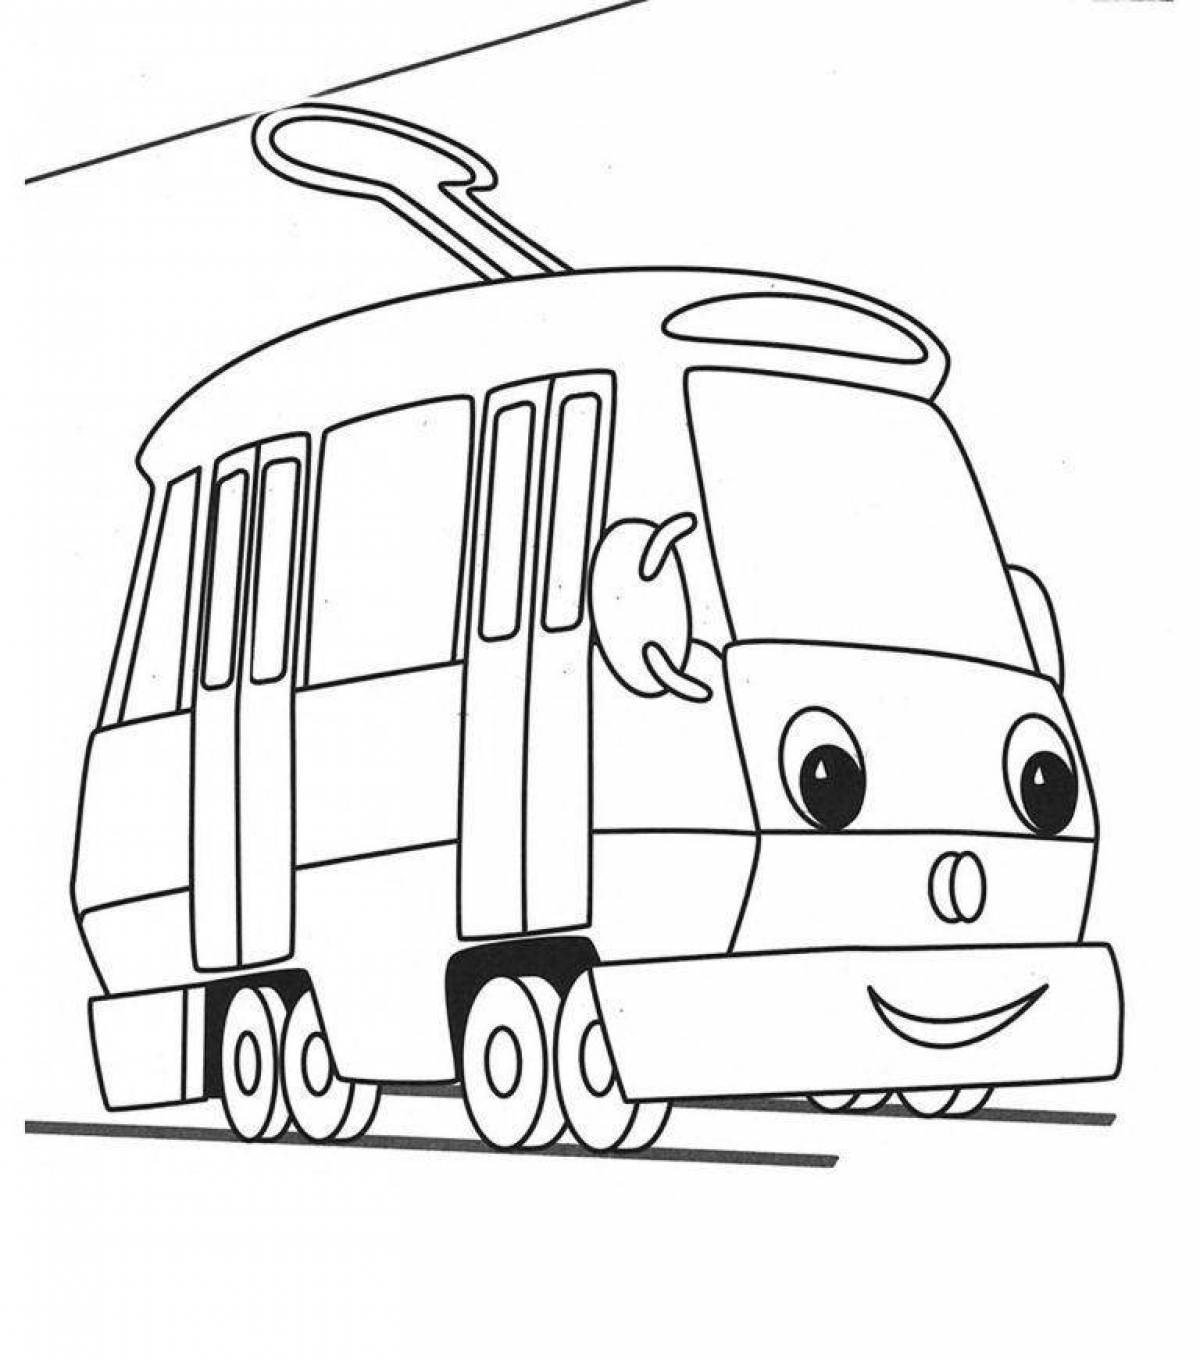 Colorful transport coloring book for kids